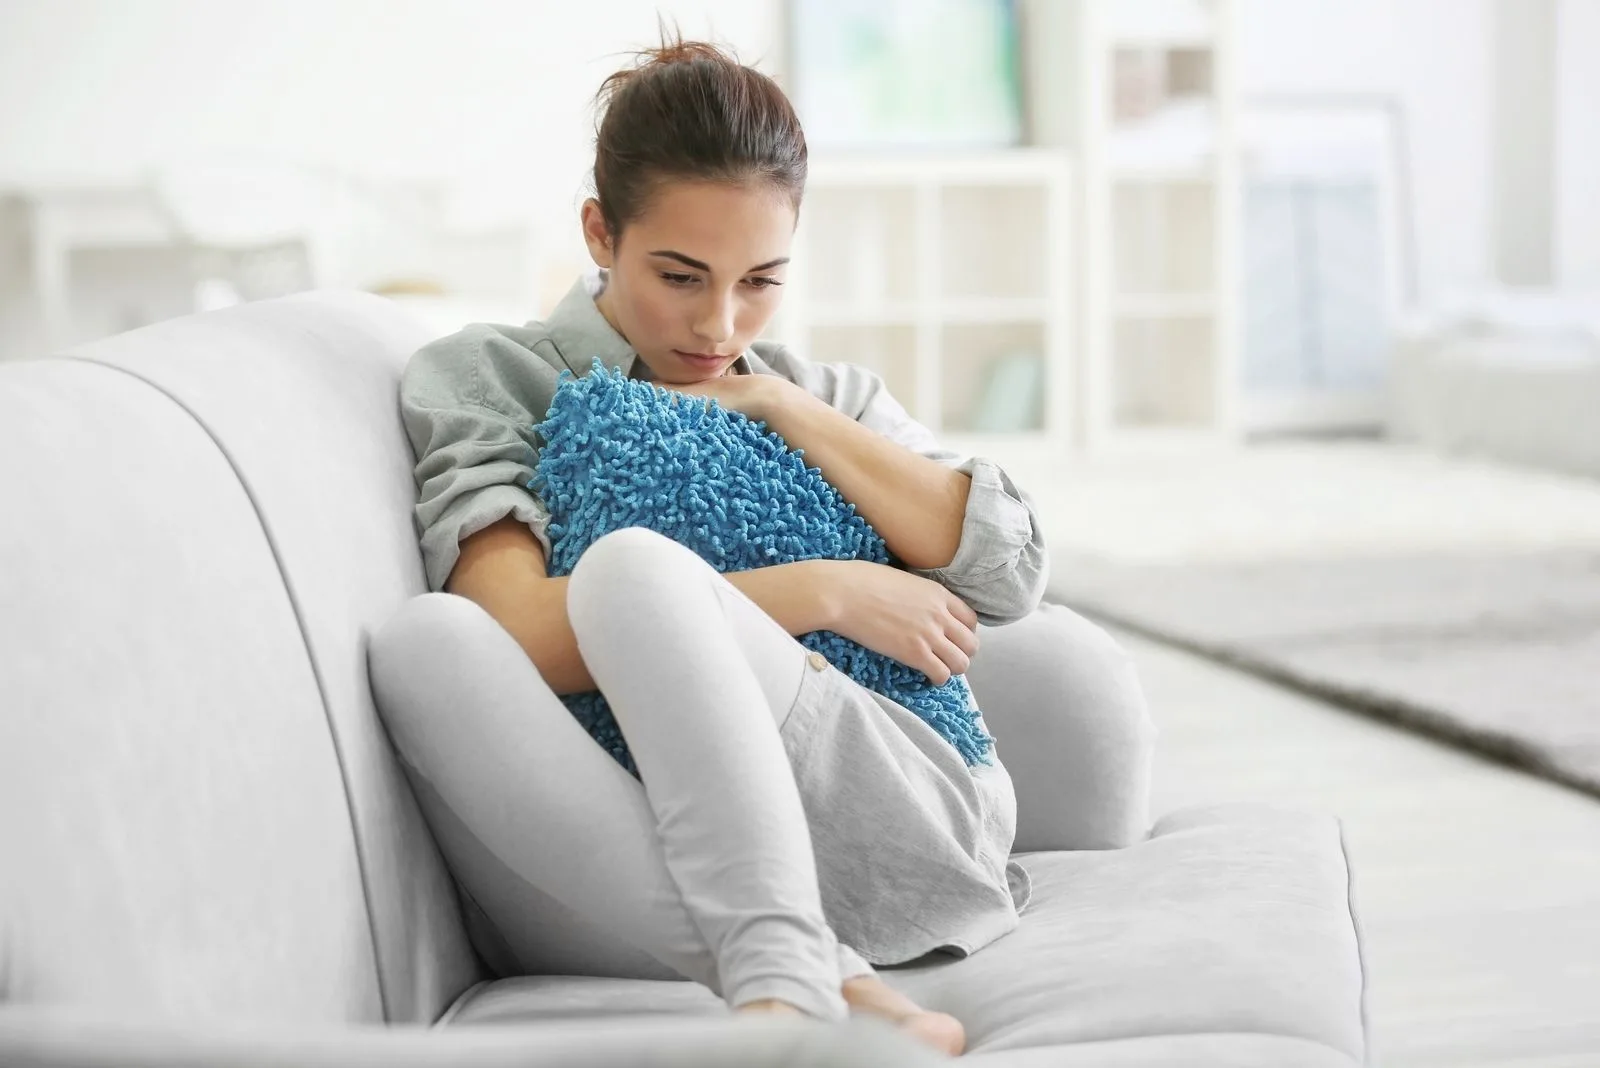 depressed young woman sitting with feet tucked in the gray couch embracing pillow in the living room